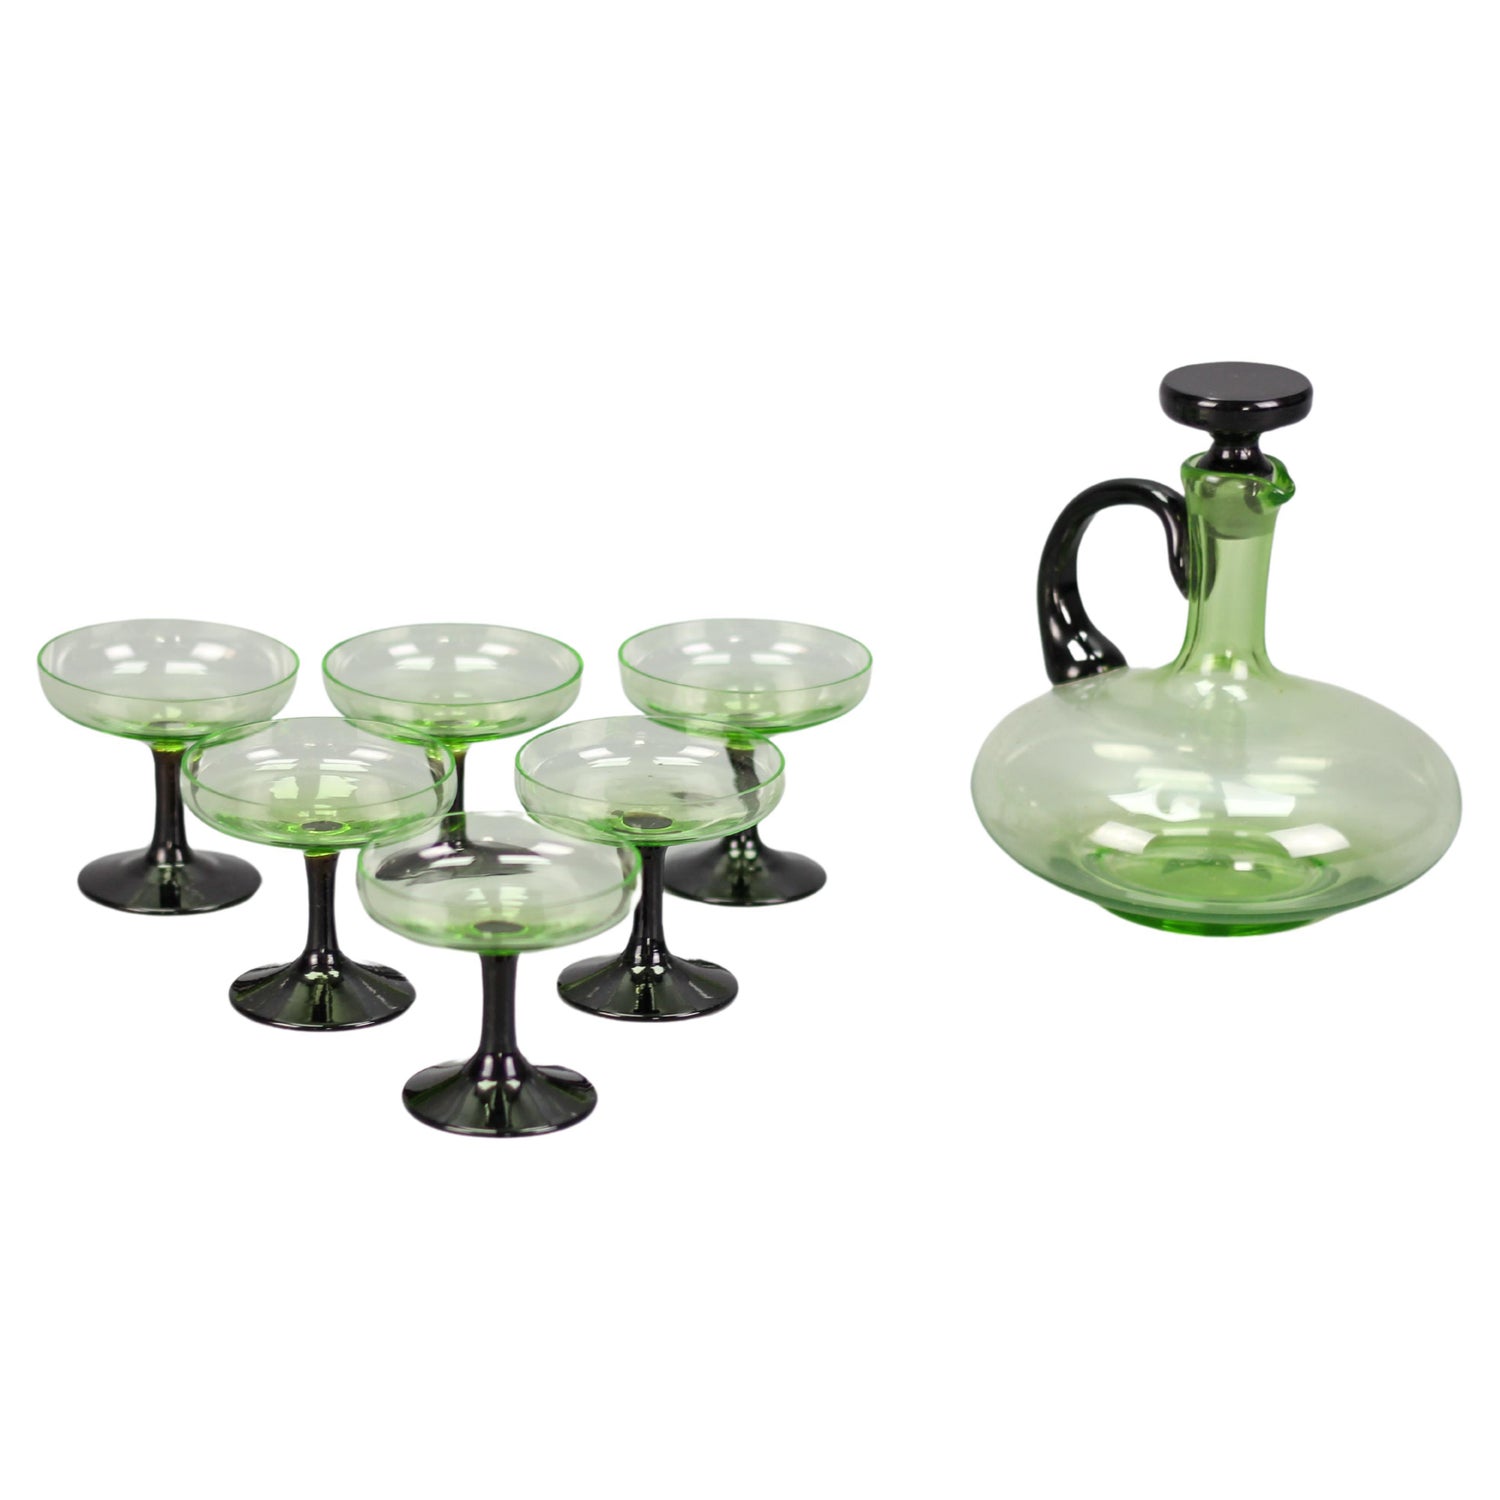 https://a.1stdibscdn.com/mid-century-modern-set-of-green-and-black-glass-decanter-and-six-glasses-for-sale/f_42681/f_372813621701179356971/f_37281362_1701179358103_bg_processed.jpg?width=1500